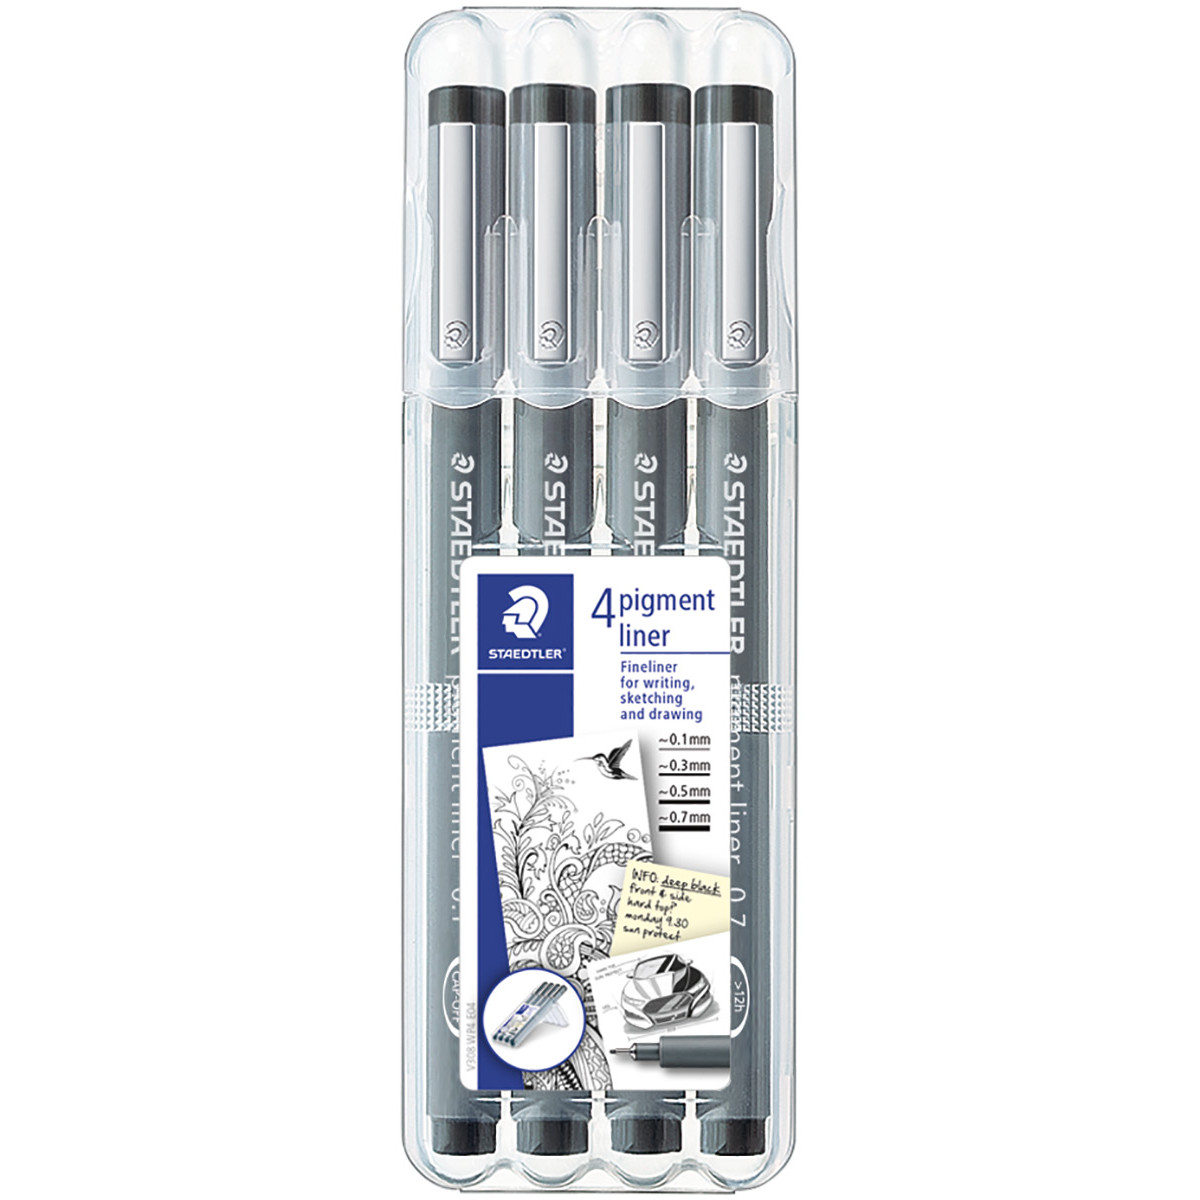 Staedtler Pigment Liners - Assorted Tip Sizes (Pack of 4)